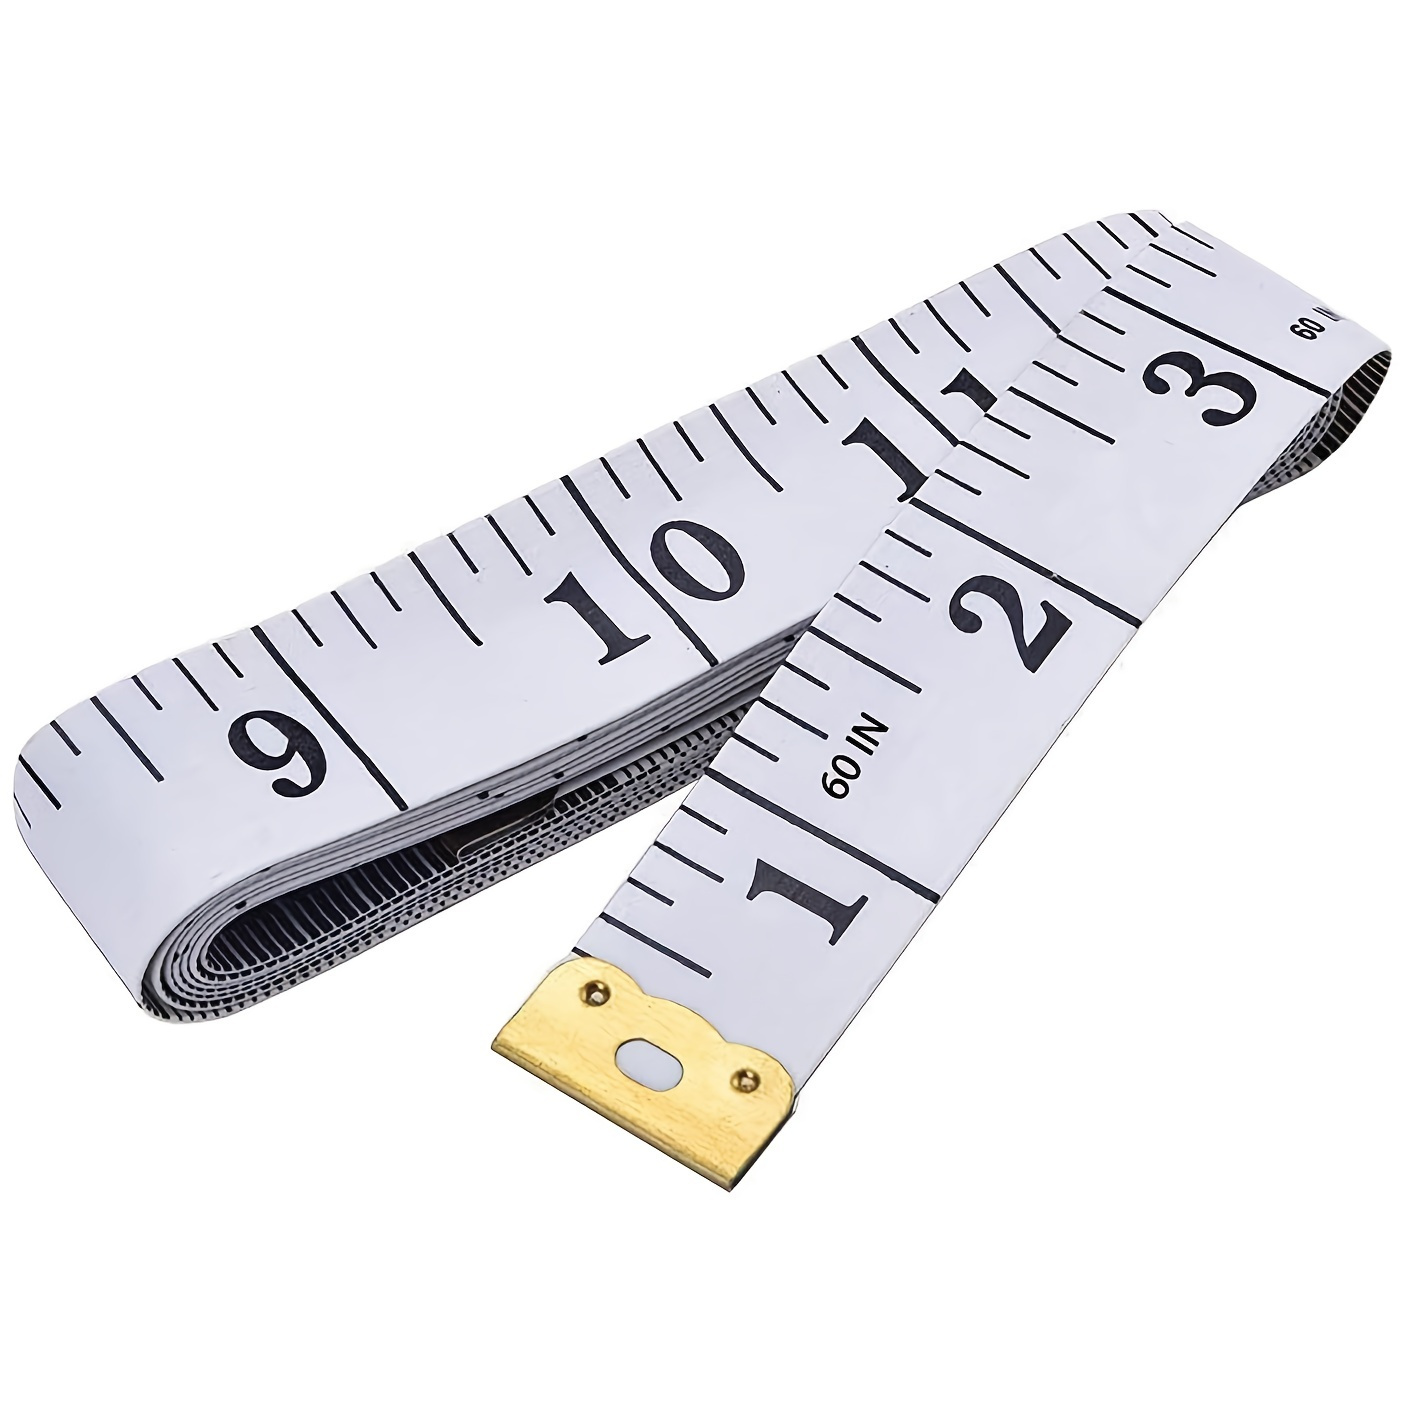 Set of 2 Soft Tape Measure for Body and Sewing, Flying Leaves Double Scale  Soft Measuring Flexible Ruler for Sewing Tailor Craft and Lose Weight